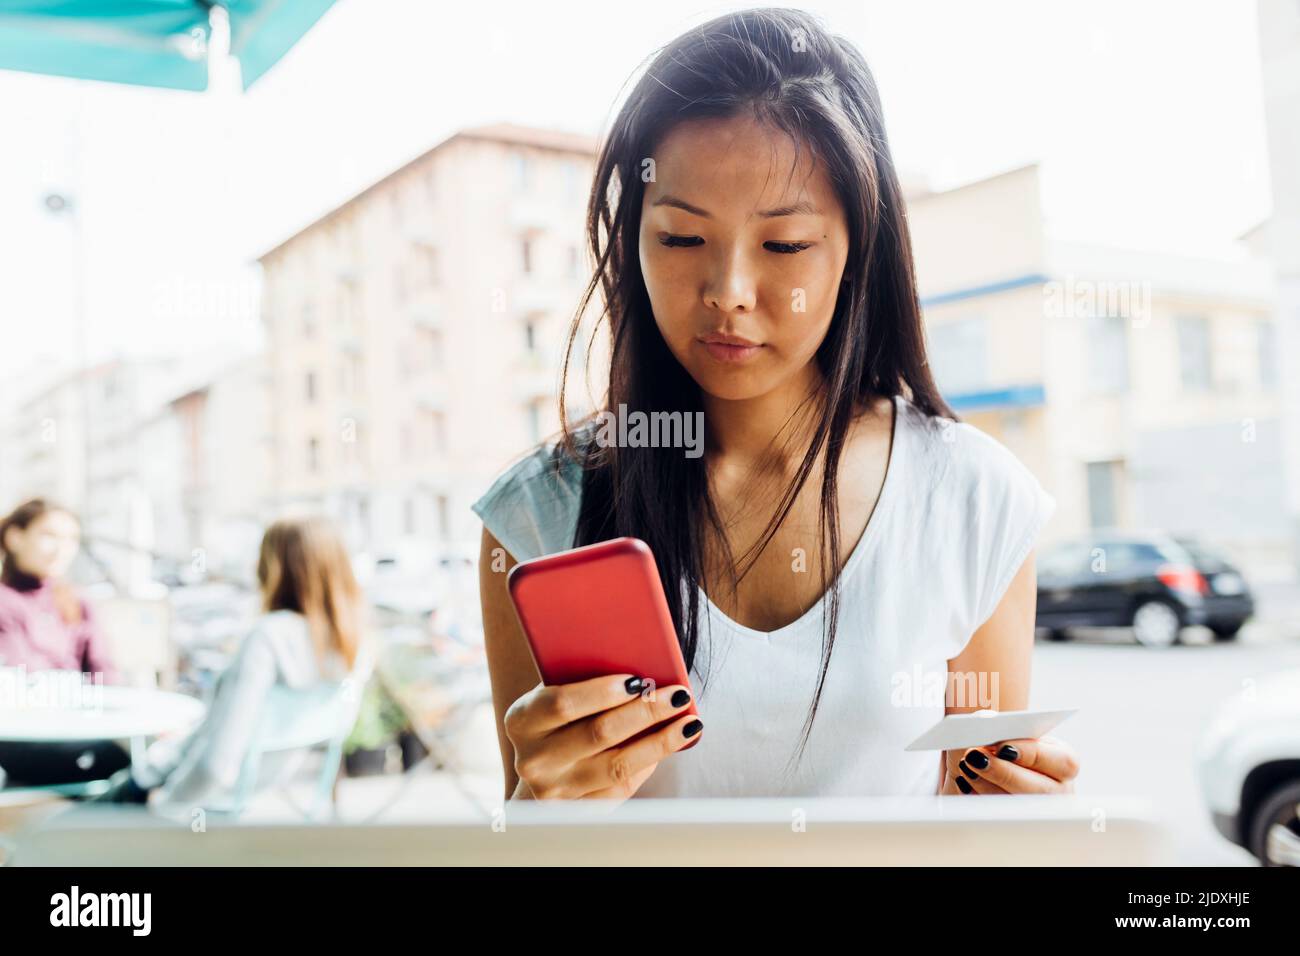 Young woman holding credit card doing online shopping through smart phone sitting at sidewalk cafe Stock Photo